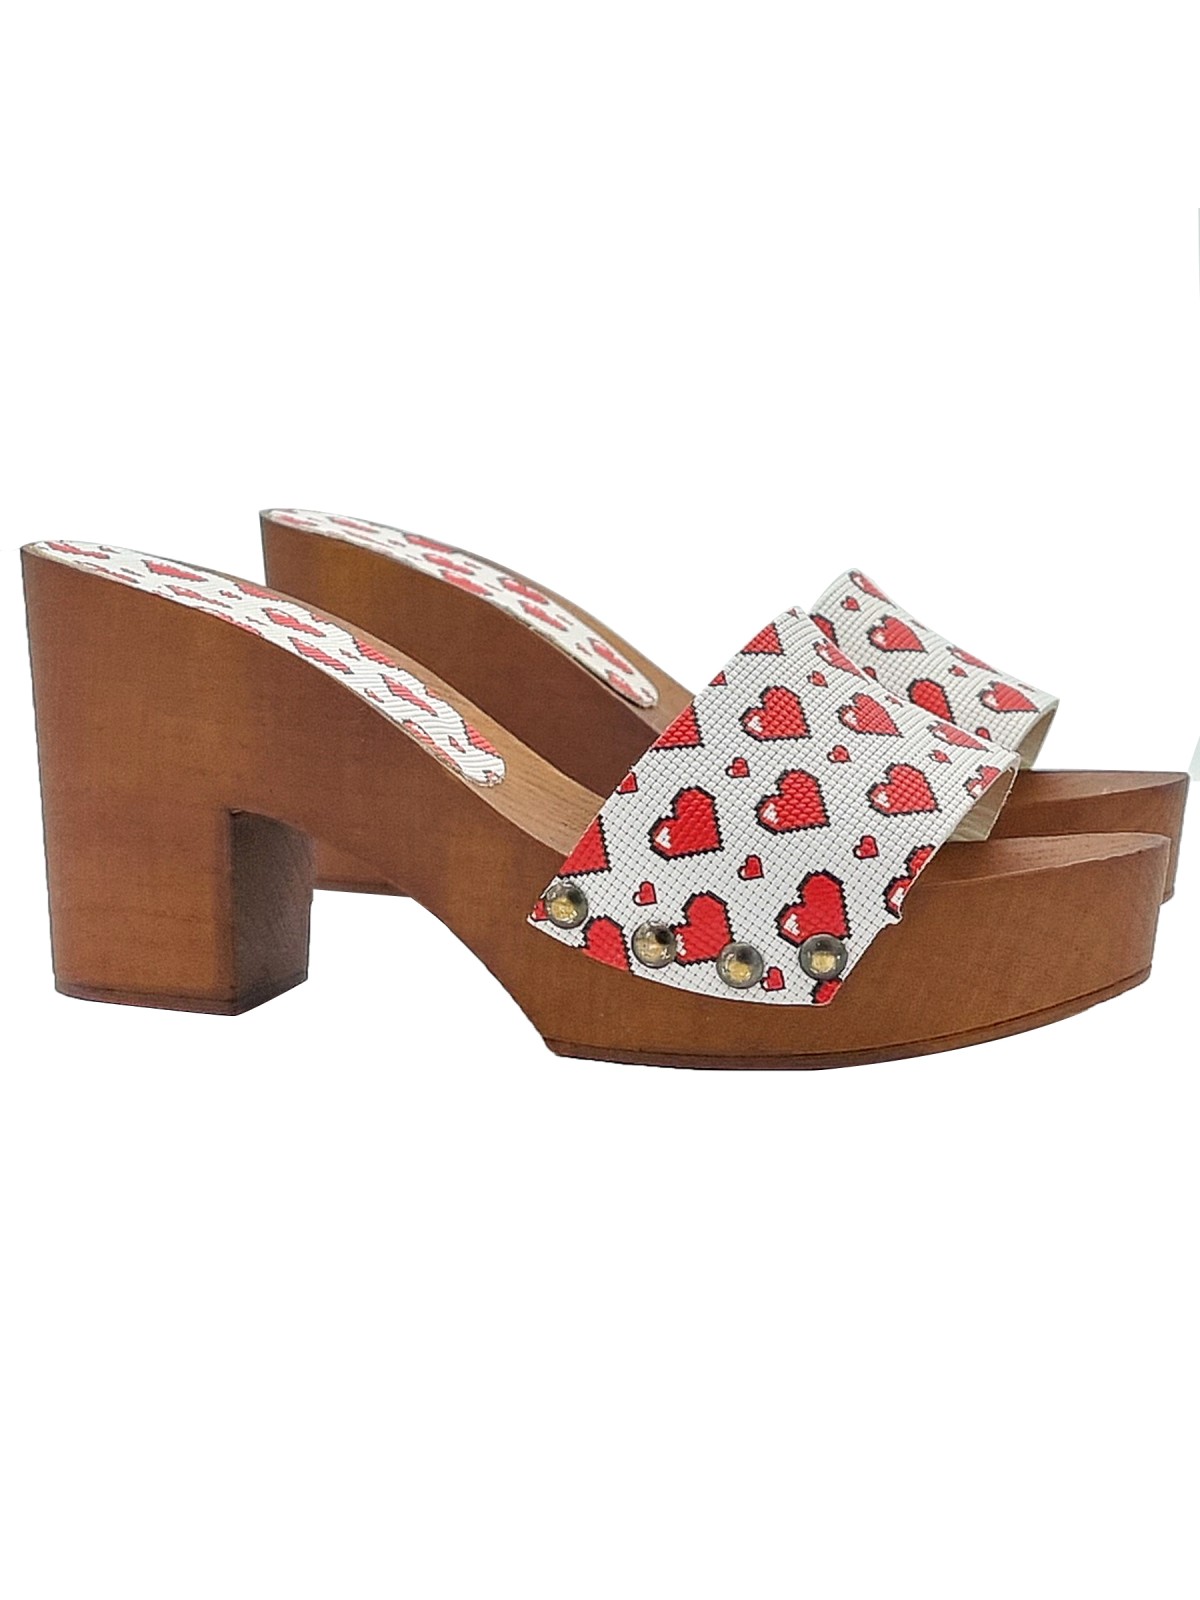 Clogs with Leather Band with Heart Print and Comfortable Heel - MY10 CUORE